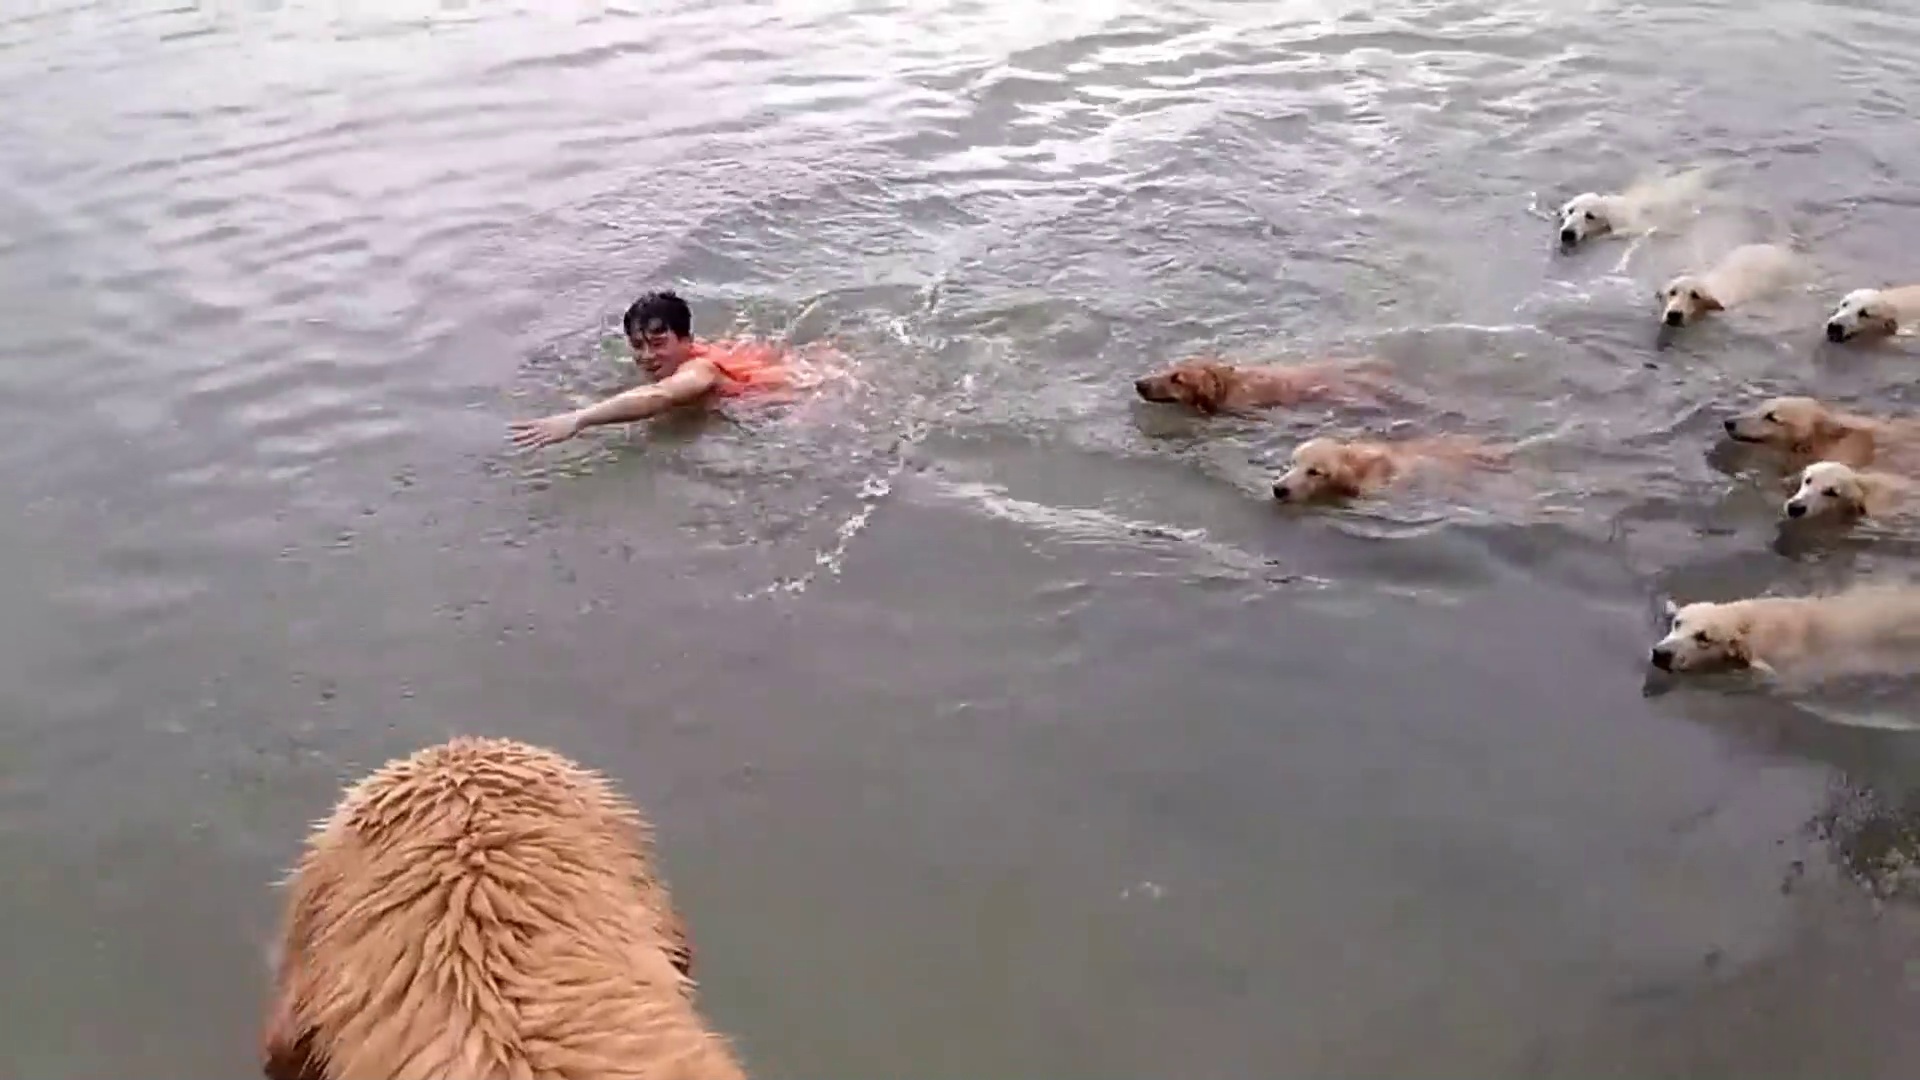 Swimming With Golden Retrievers